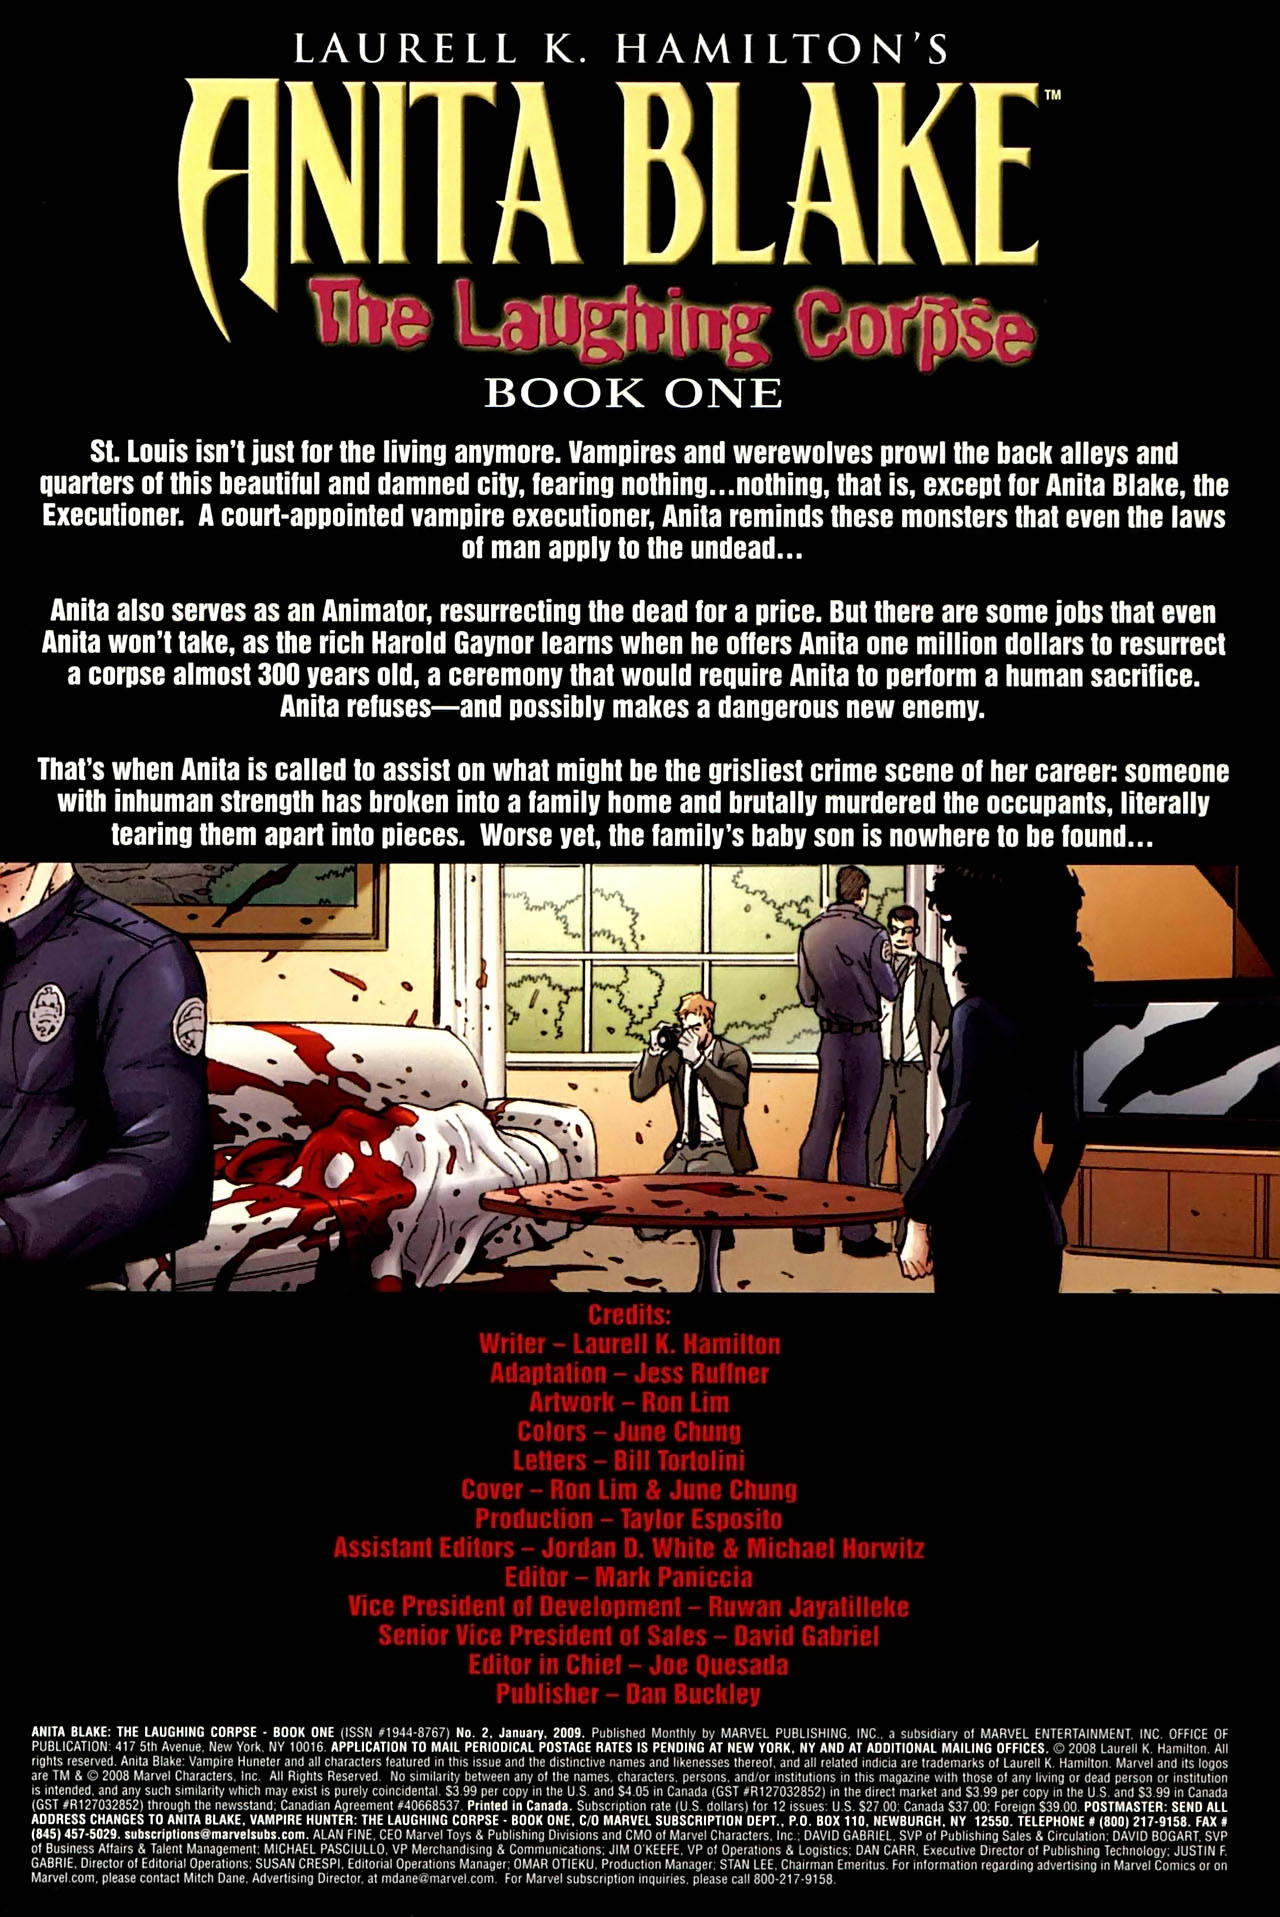 Read online Anita Blake: The Laughing Corpse - Book One comic -  Issue #2 - 2